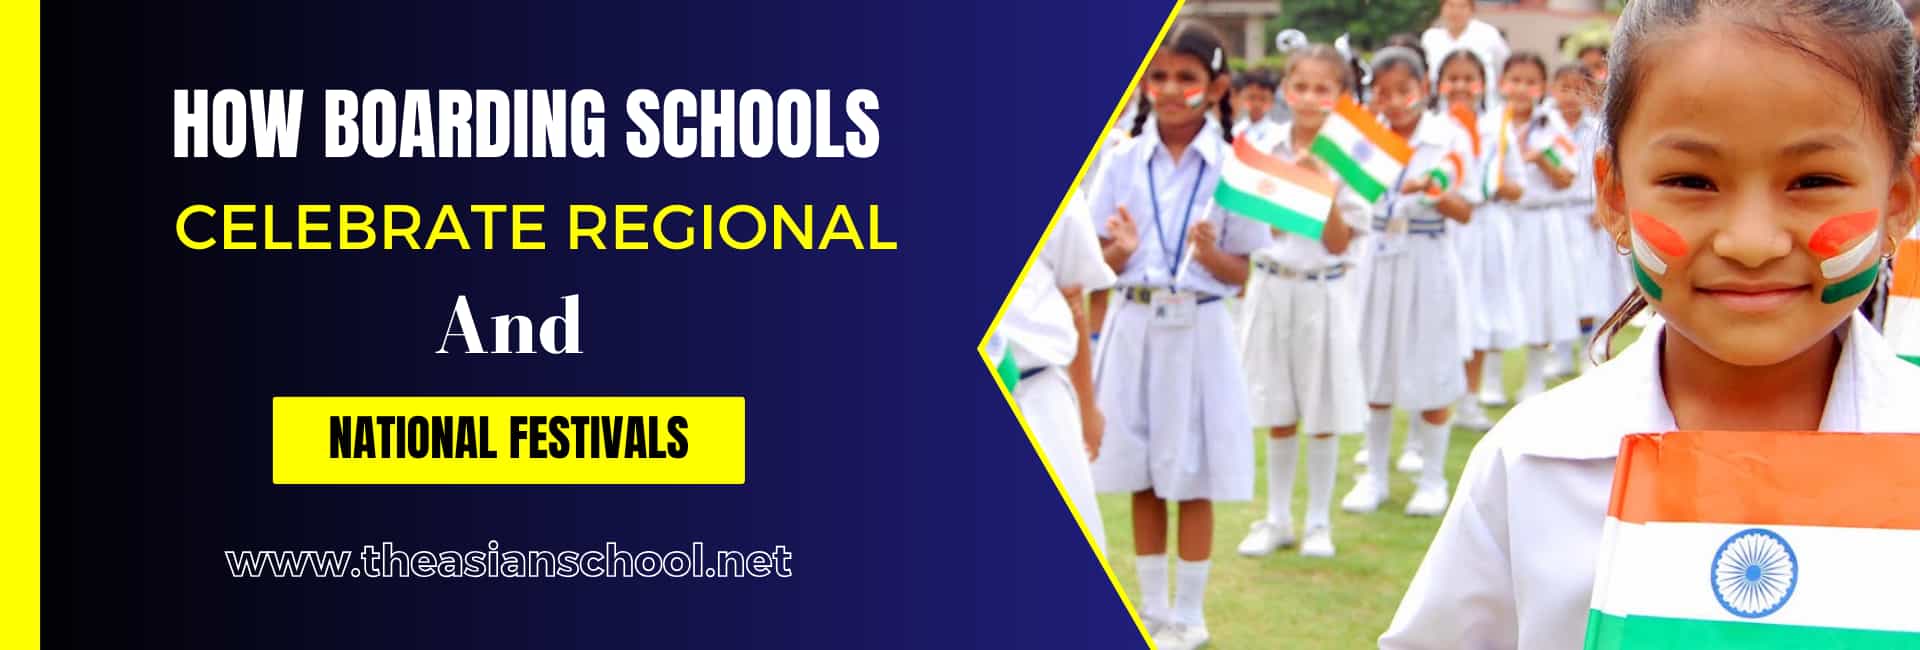 How Boarding Schools Celebrate Regional And National Festivals